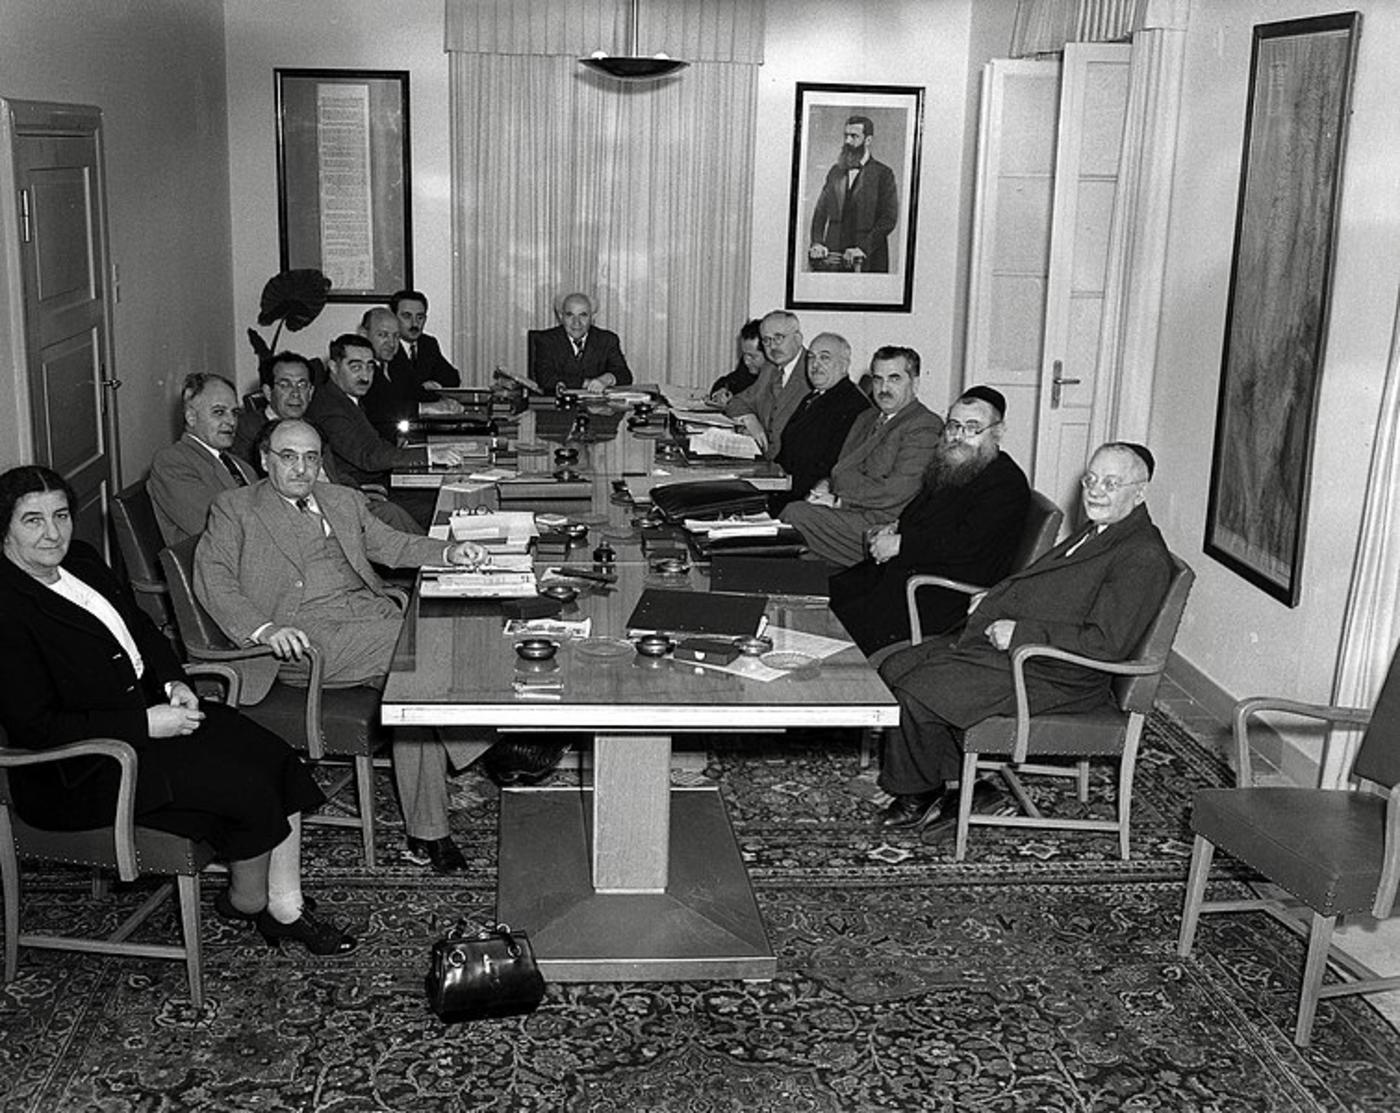 Moshe Sharett seen seated to the left of first Israeli Prime Minister David Ben-Gurion with the first Israeli government in 1949 (Wikicommons)